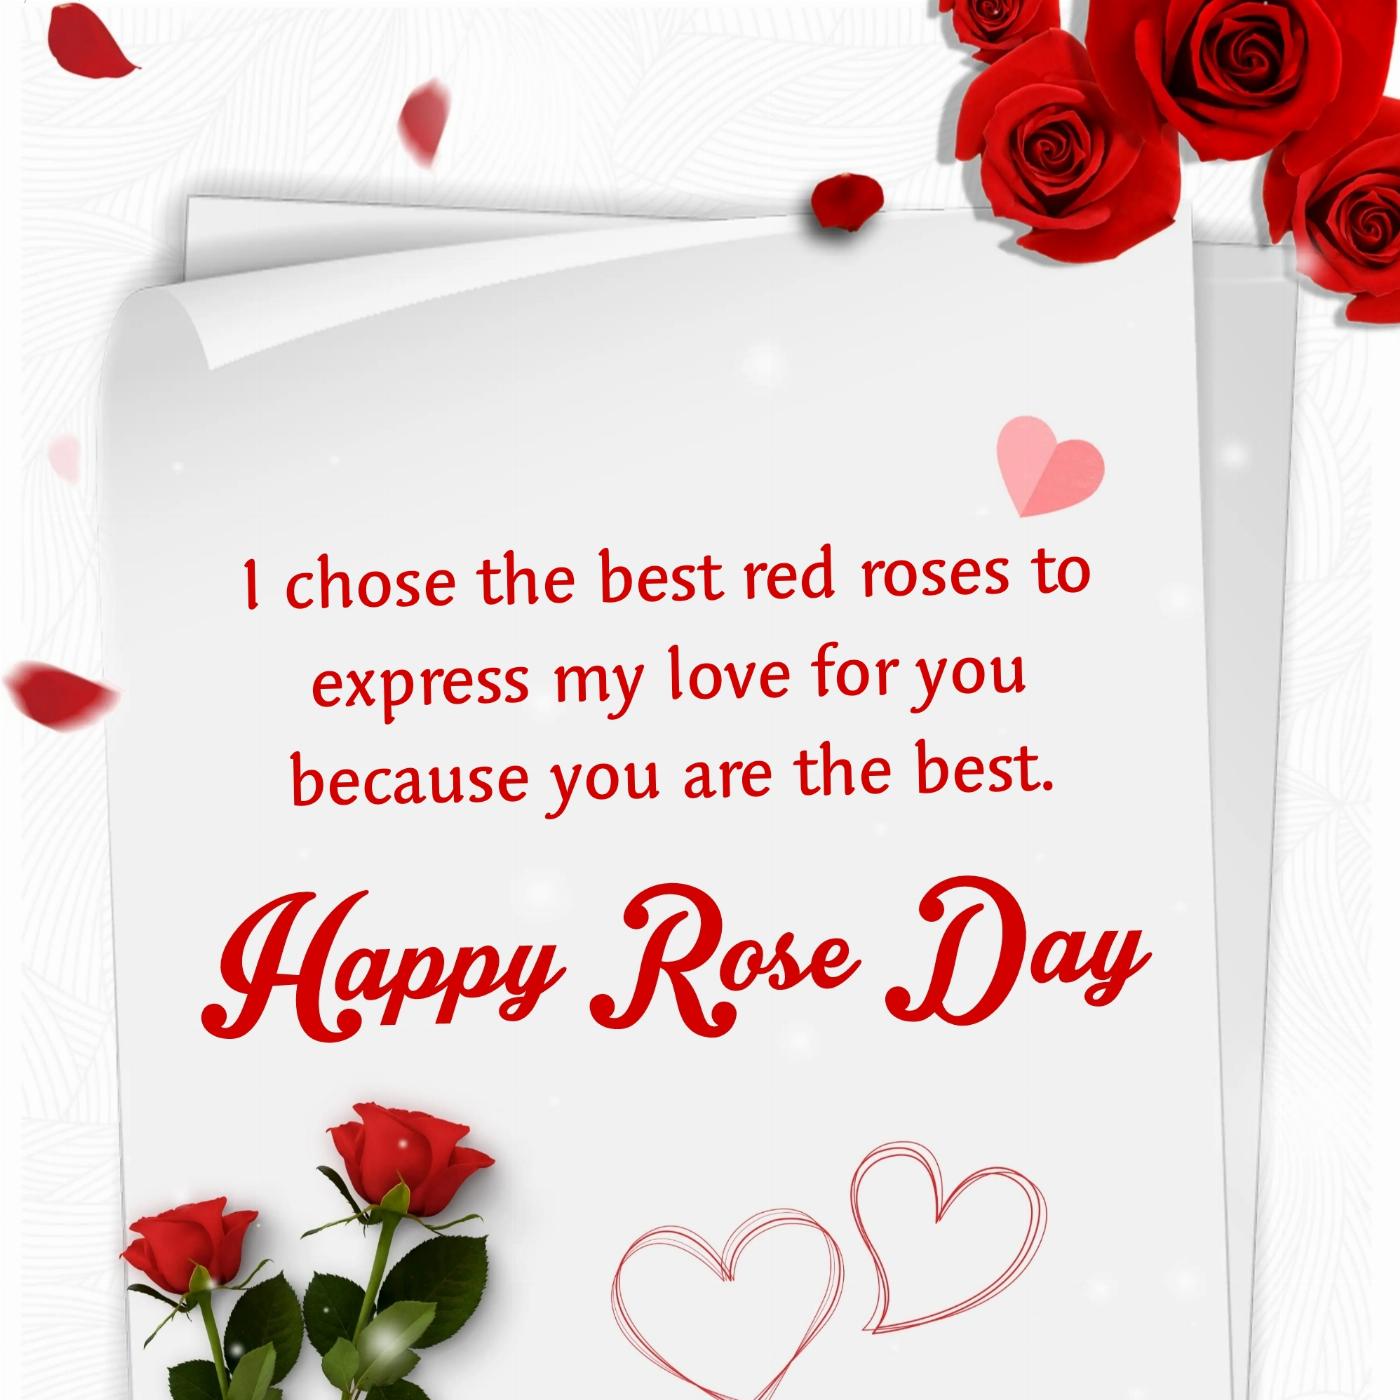 I chose the best red roses to express my love for you